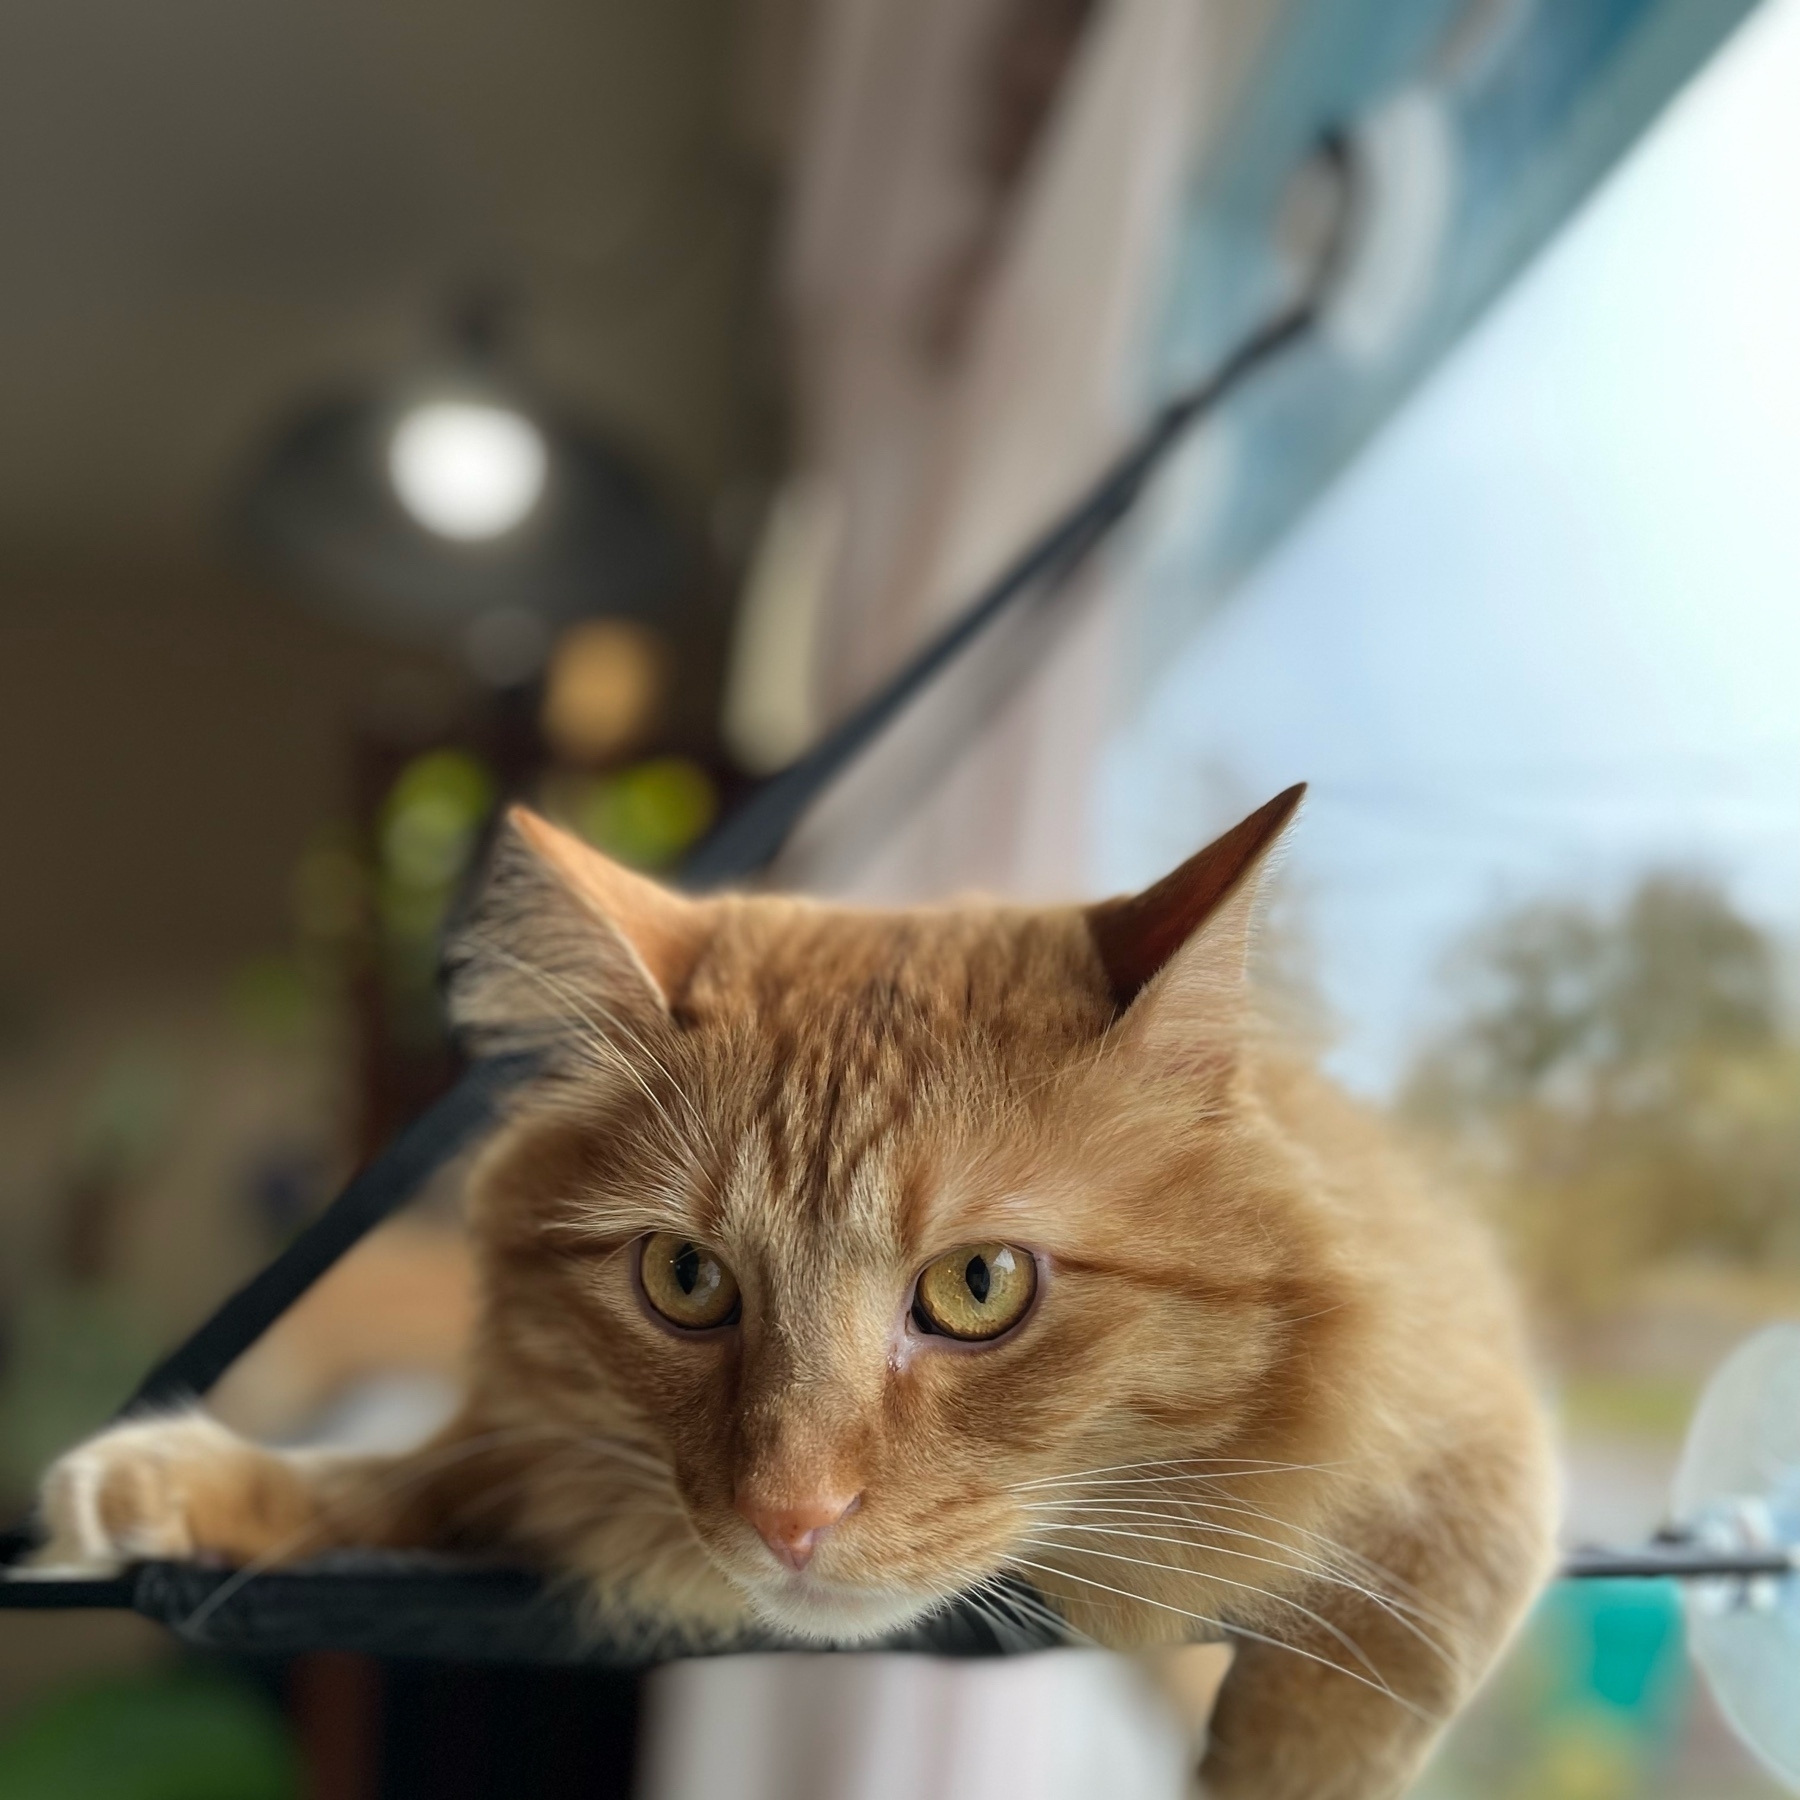 The face of an orange cat, looking away from the camera, lying in a hammock in a window. He looks thoughtful.